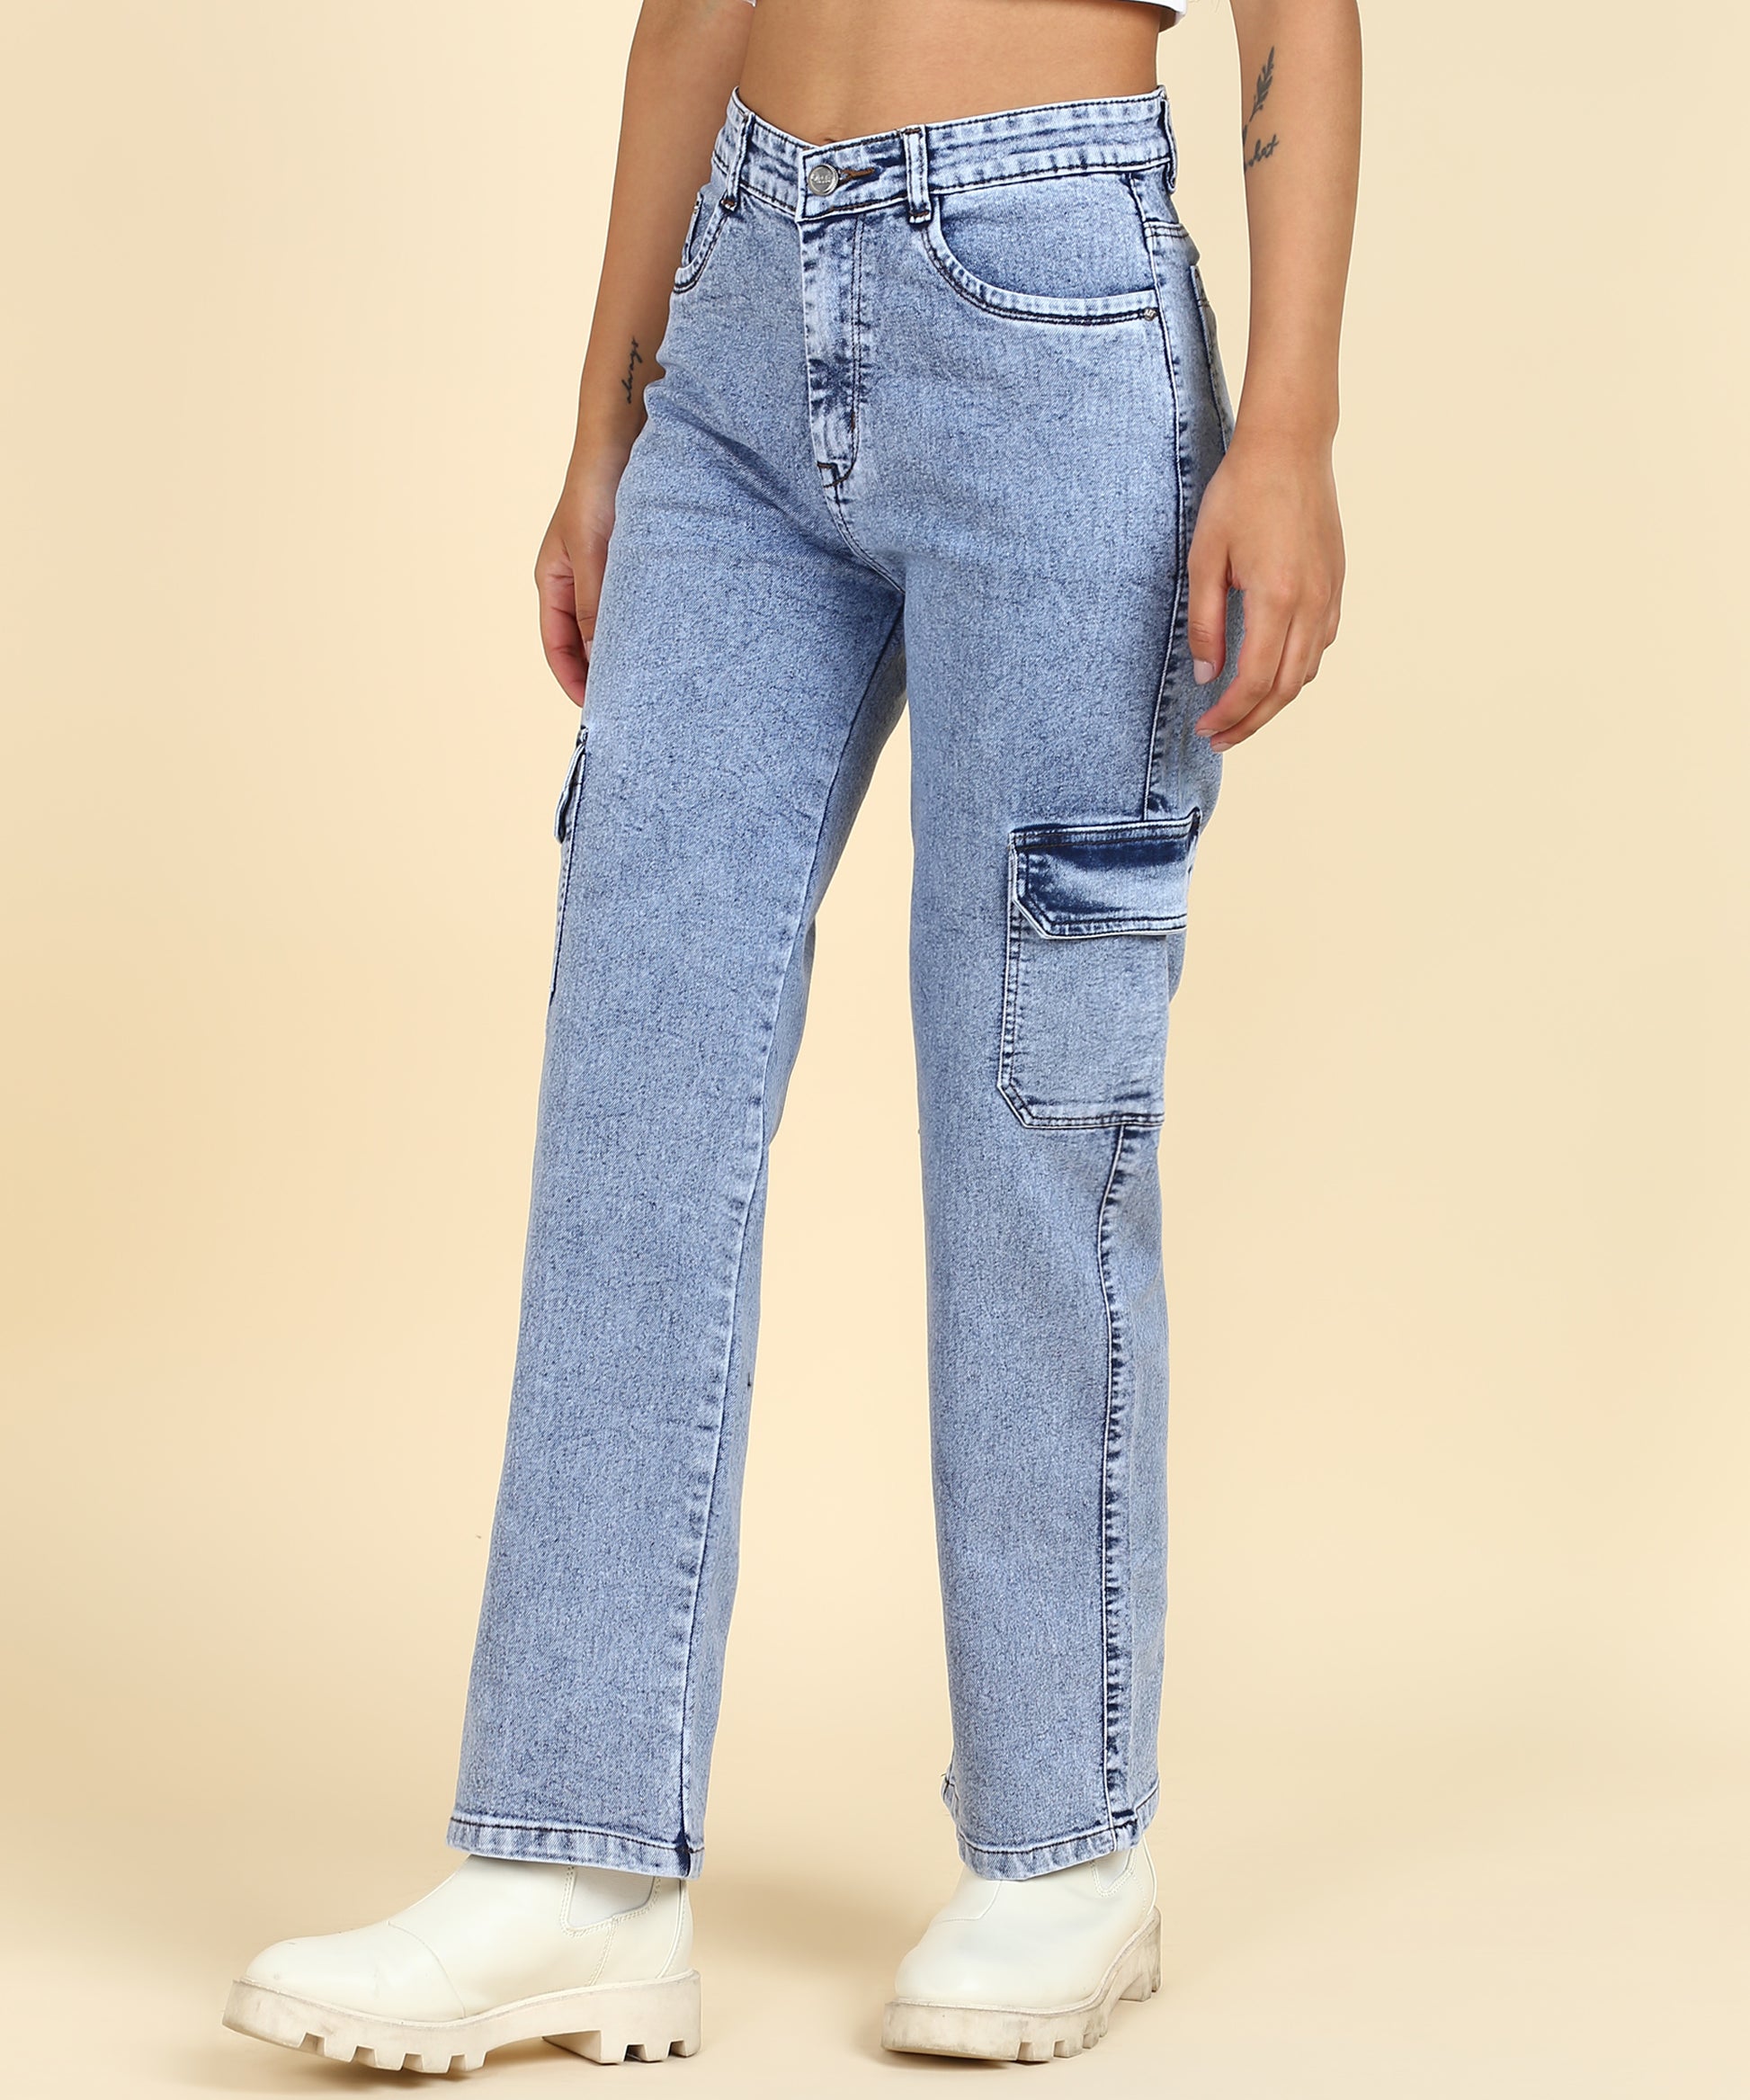 Straight-fit jeans - Women's fashion